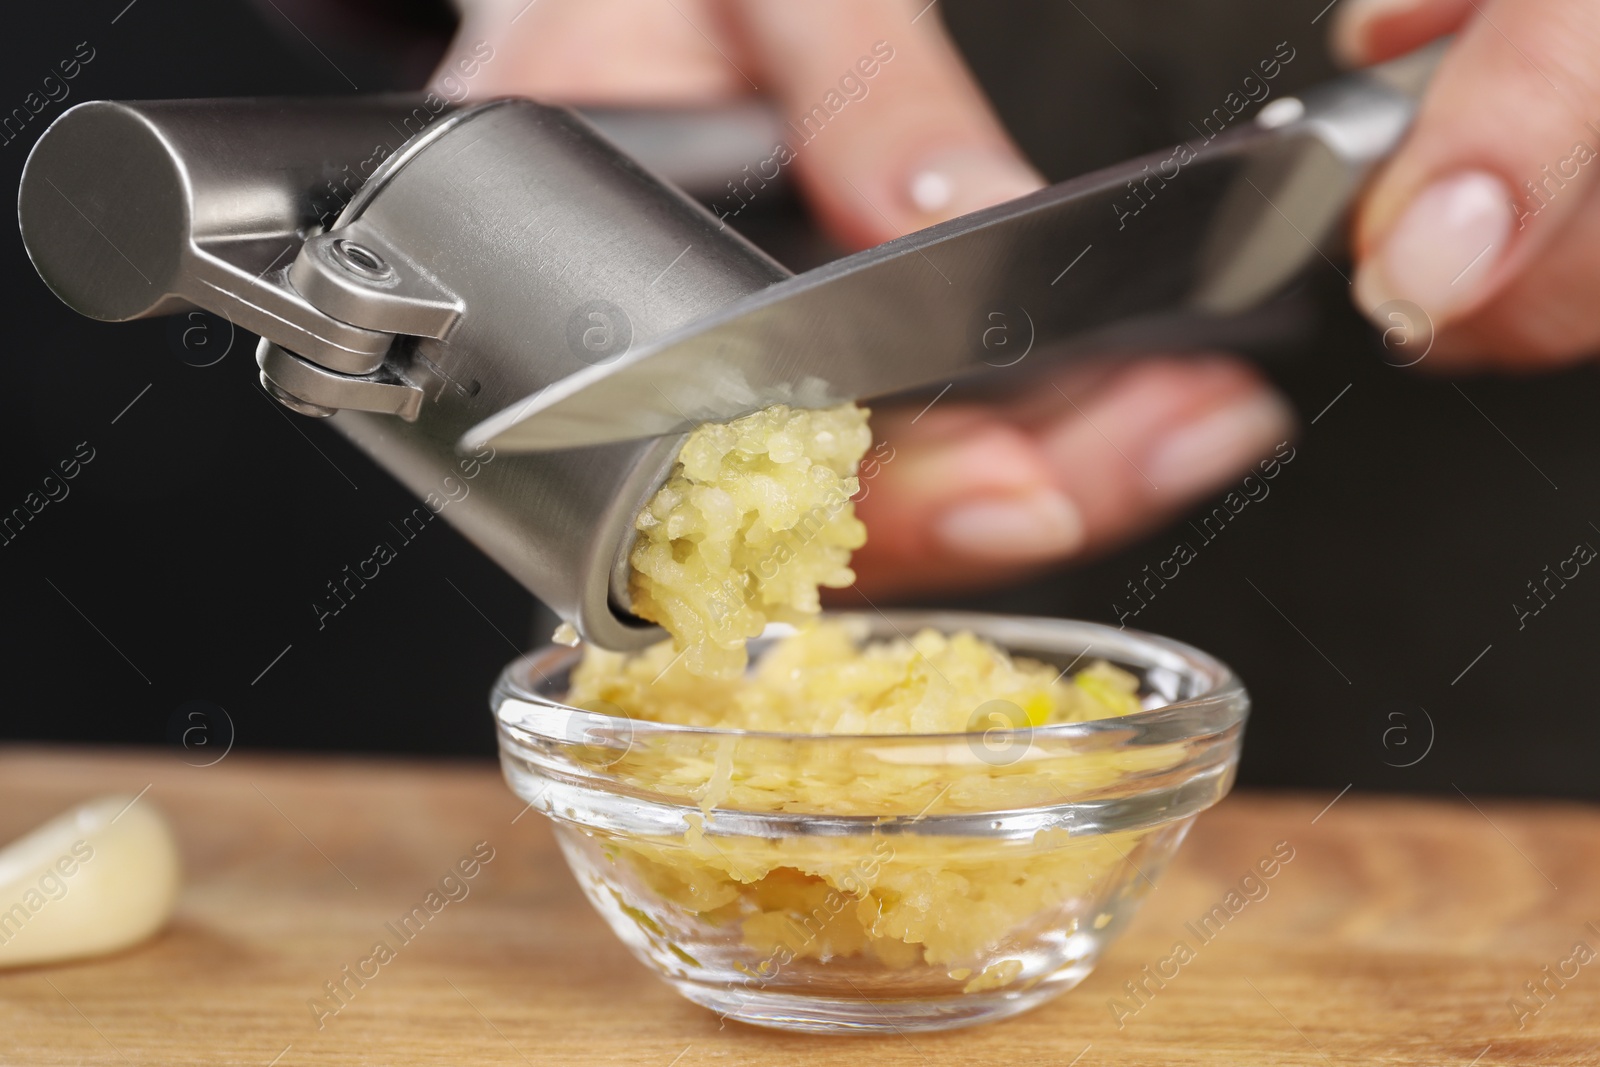 Photo of Woman squeezing garlic with press at wooden table, closeup